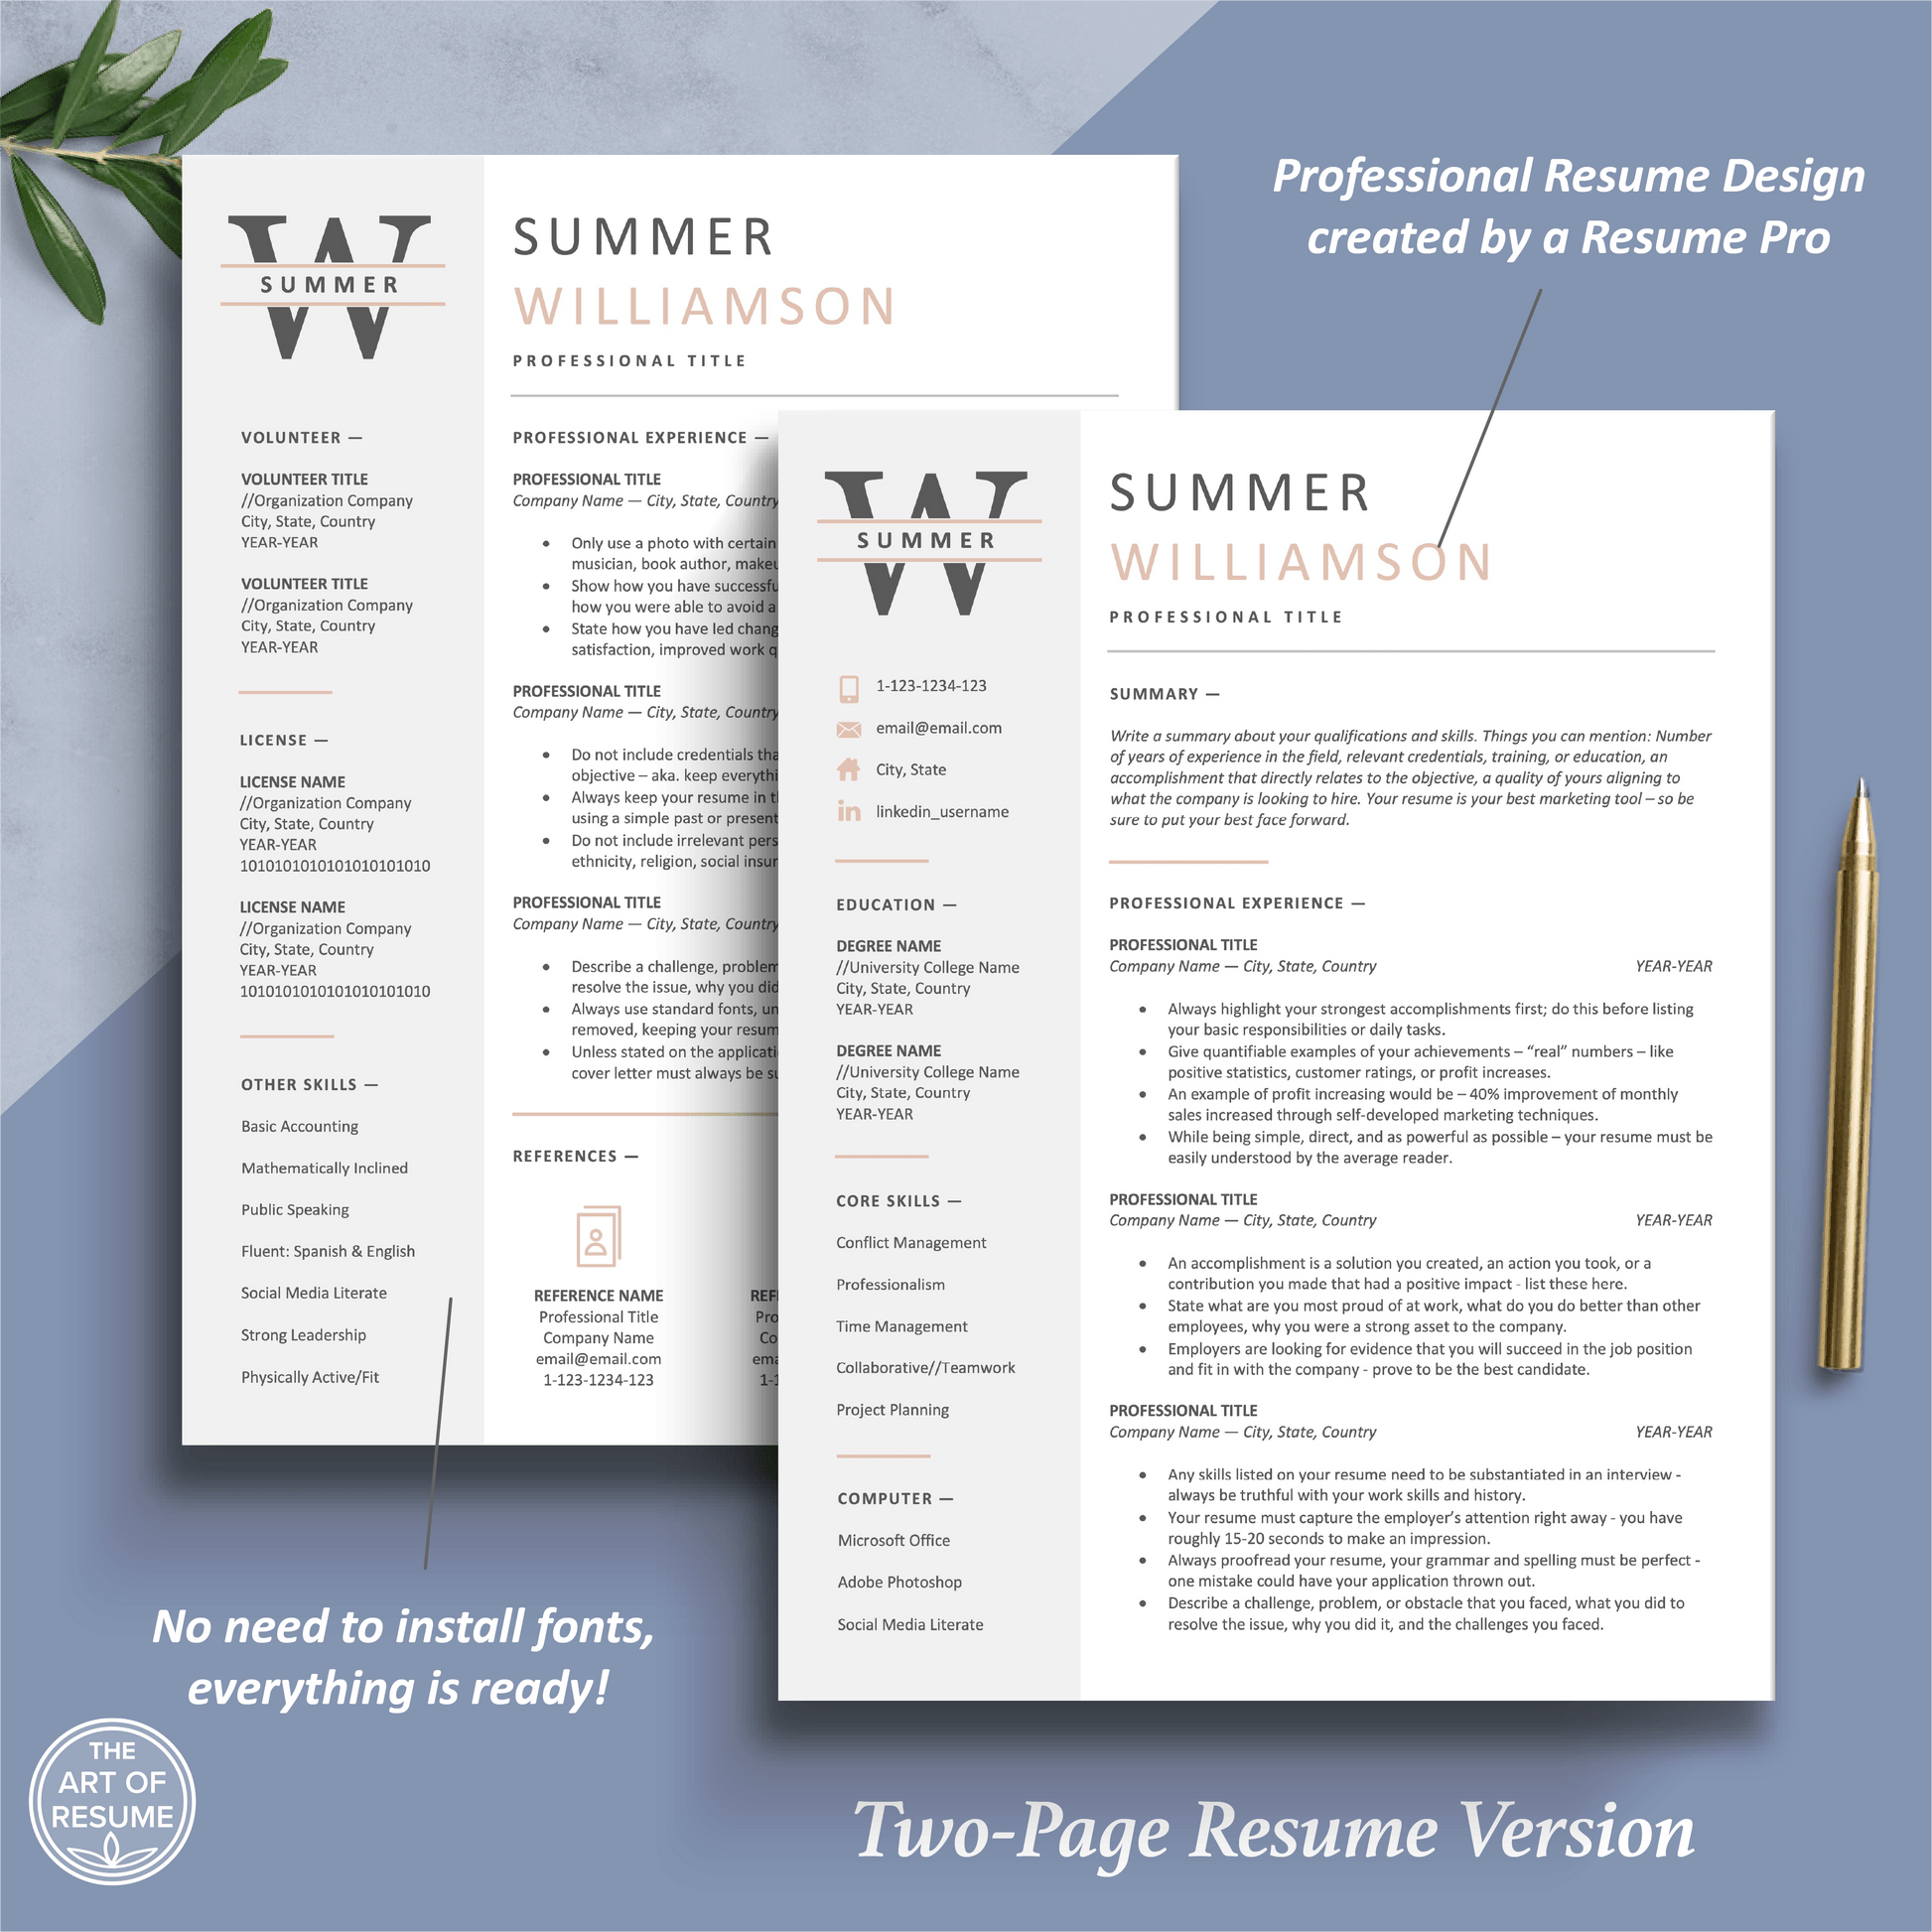 The Art of Resume Templates | Two Page Professional Pink and Grey Executive Resume CV Template | Curriculum Vitae